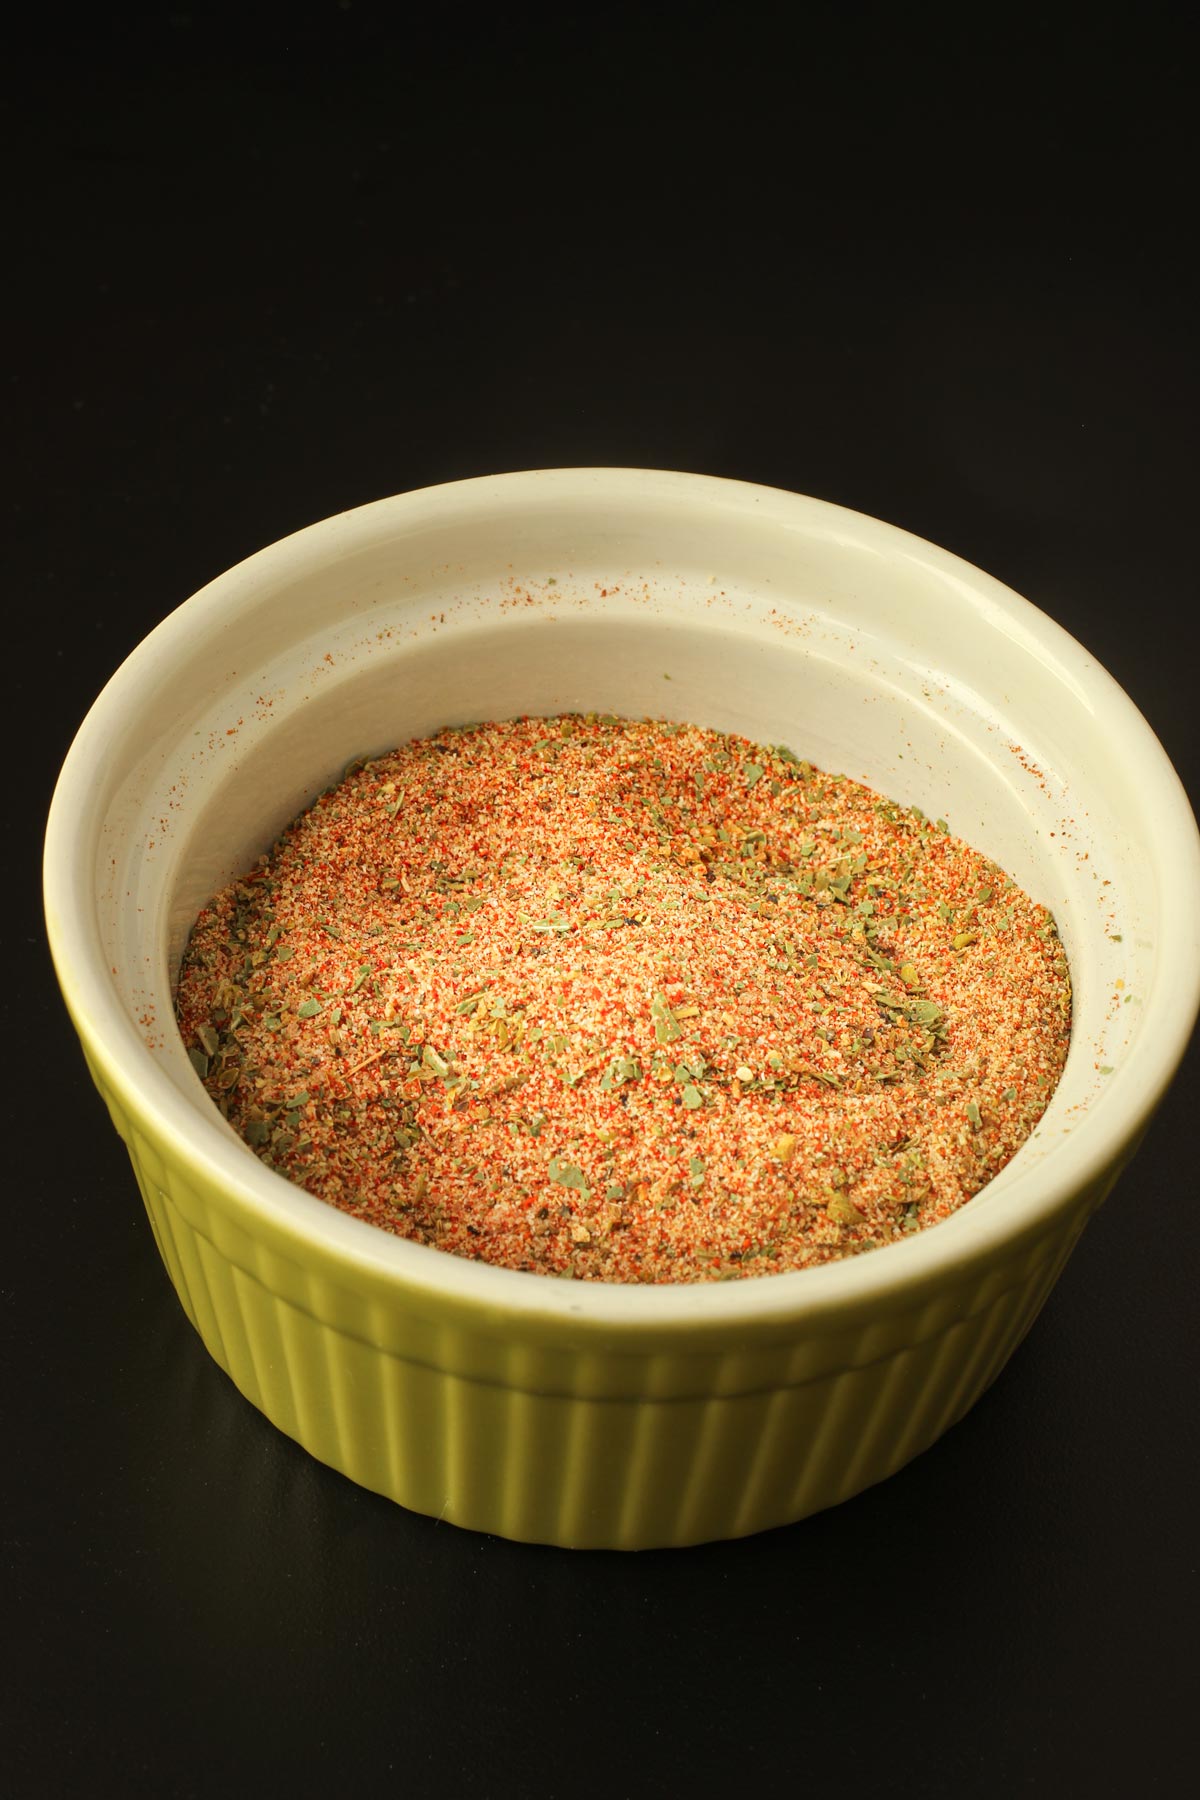 Jamie's spice mix in a small green bowl.